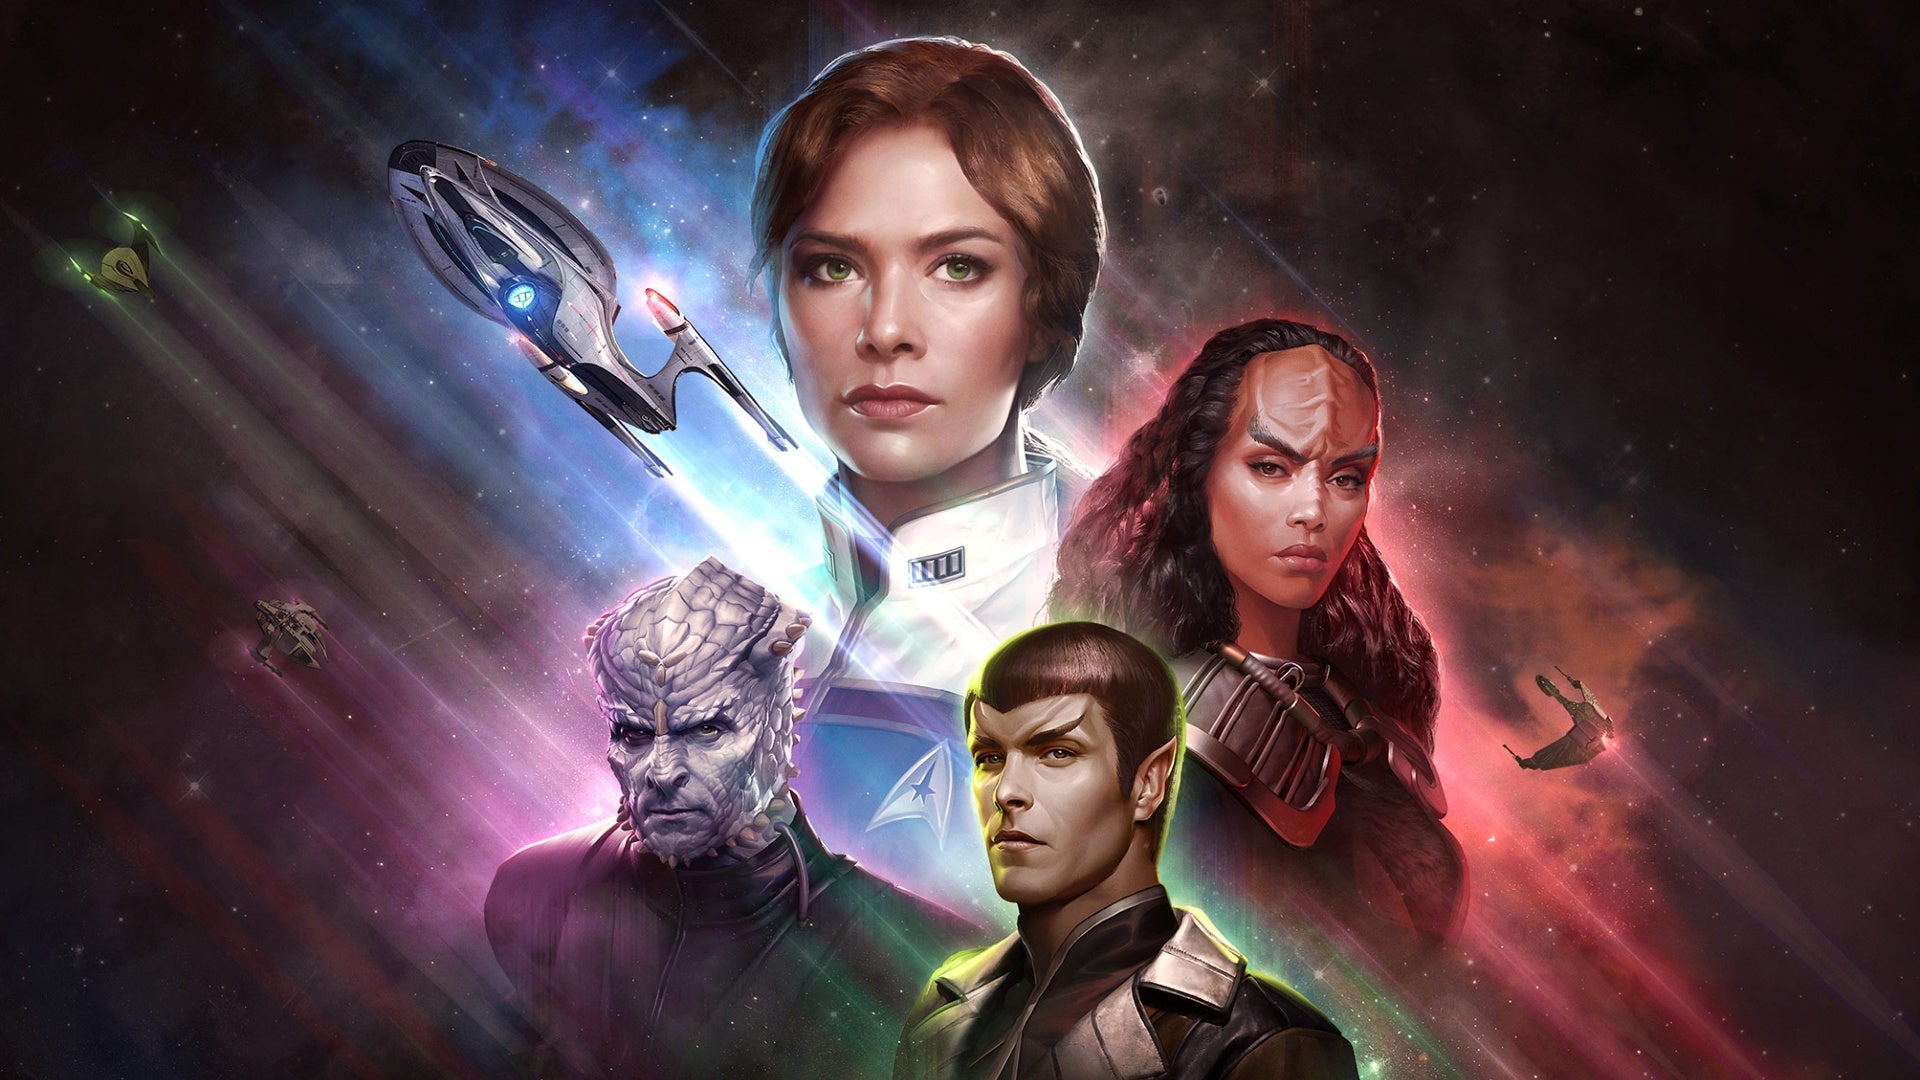 MMO RPG Star Trek Online has boldly kept going since it launched in 2010.